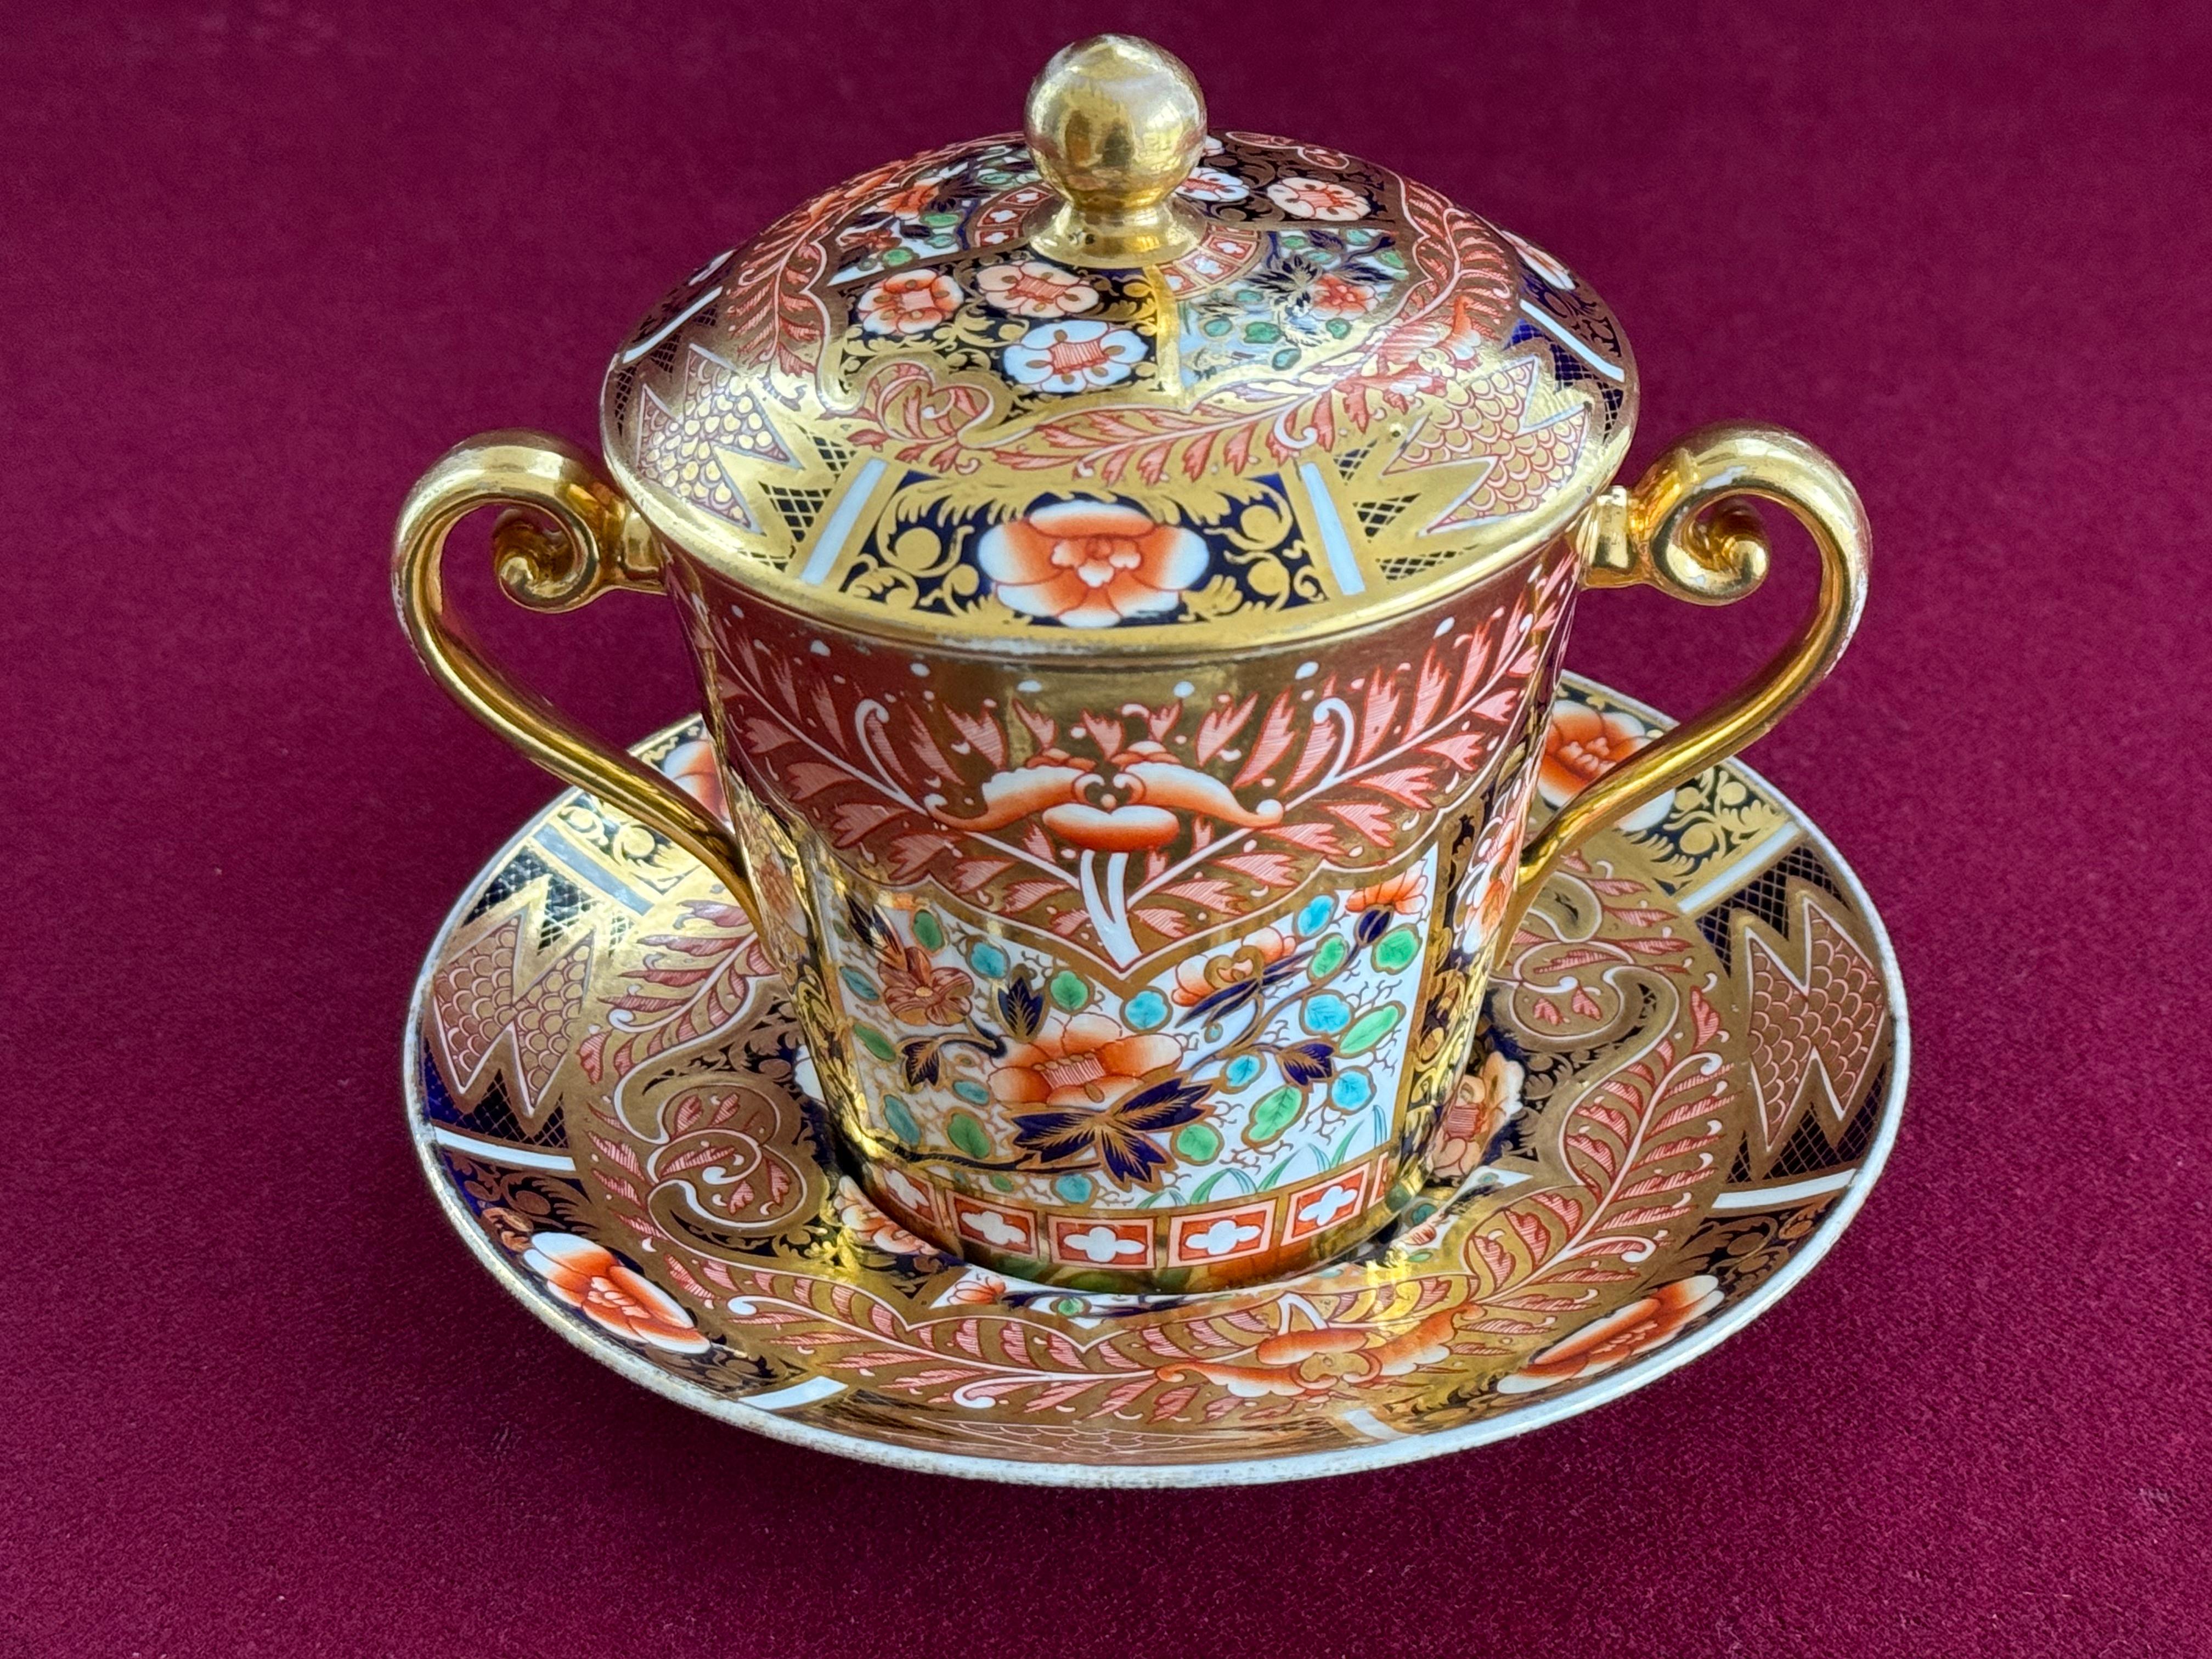 A very fine Spode bone china chocolate cup, cover and stand, vibrantly decorated in pattern 1494 which is an extremely ornate Imari design which covers every inch of the piece. This pattern was introduced c.1809 and was probably a direct copy of a